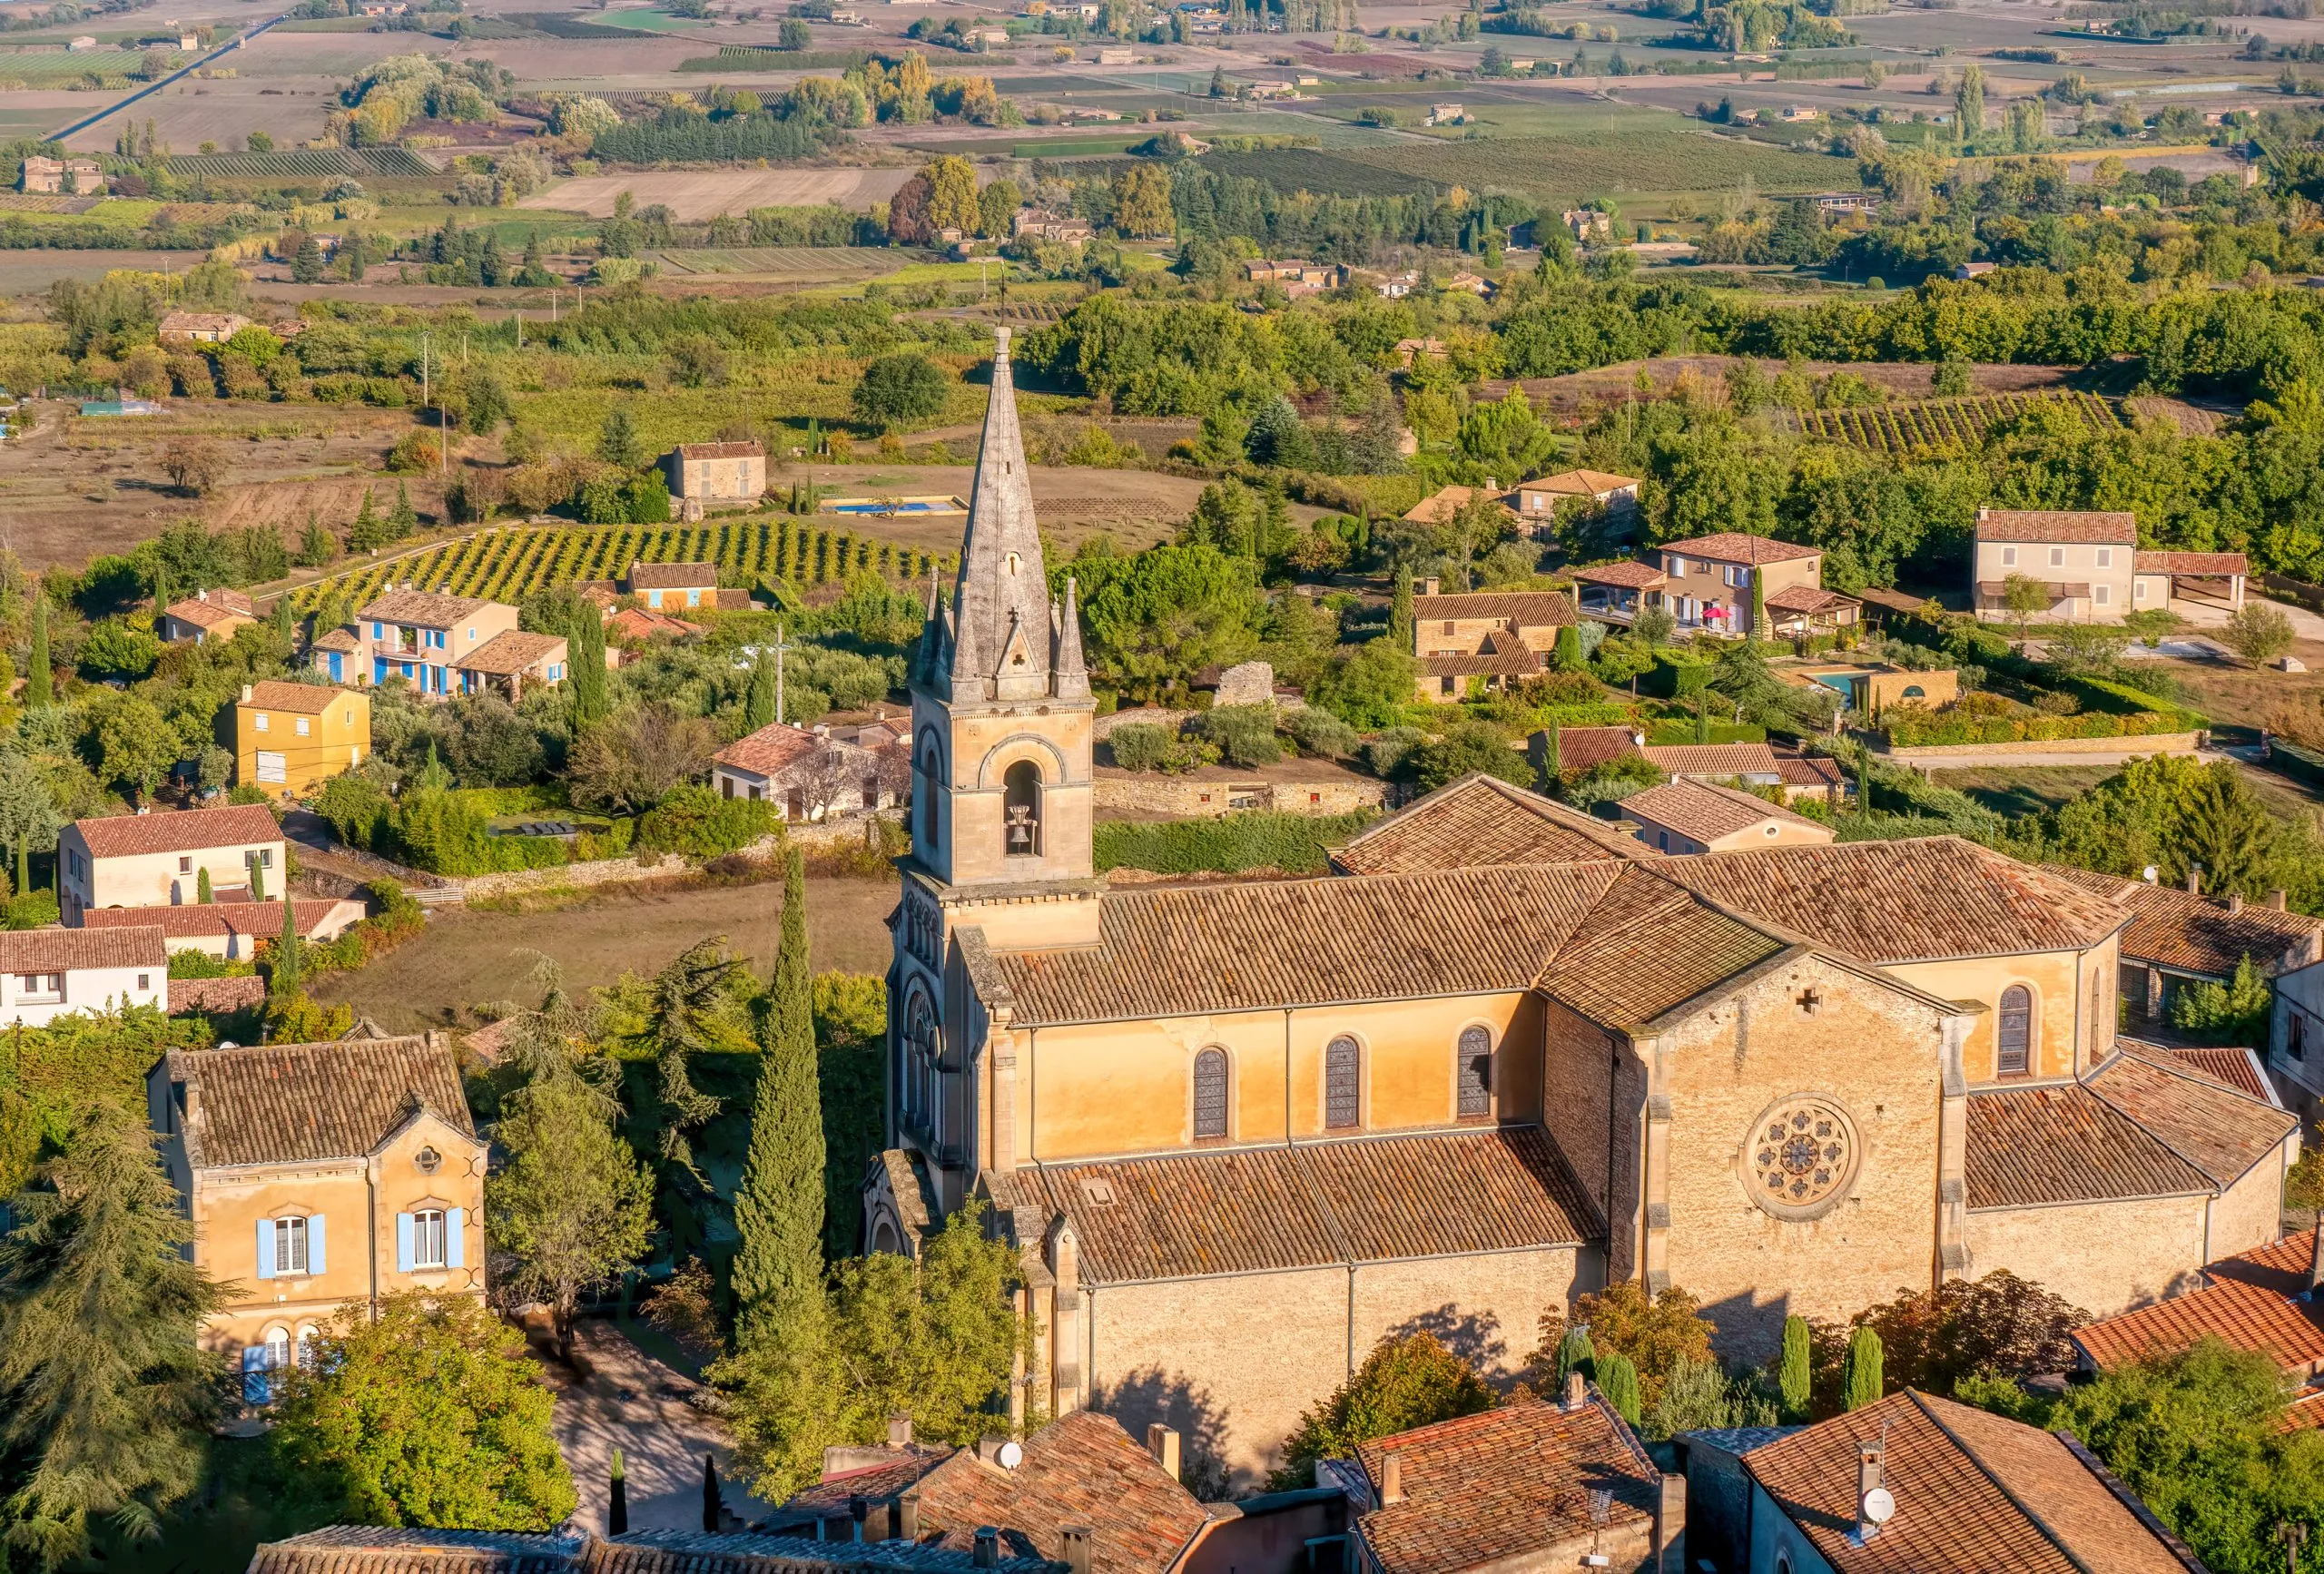 High angle view of the town's second, newer, 18th century church known as the Eglise Bas, in the picturesque village of Bonnieux in the Luberon region of Provence, France.